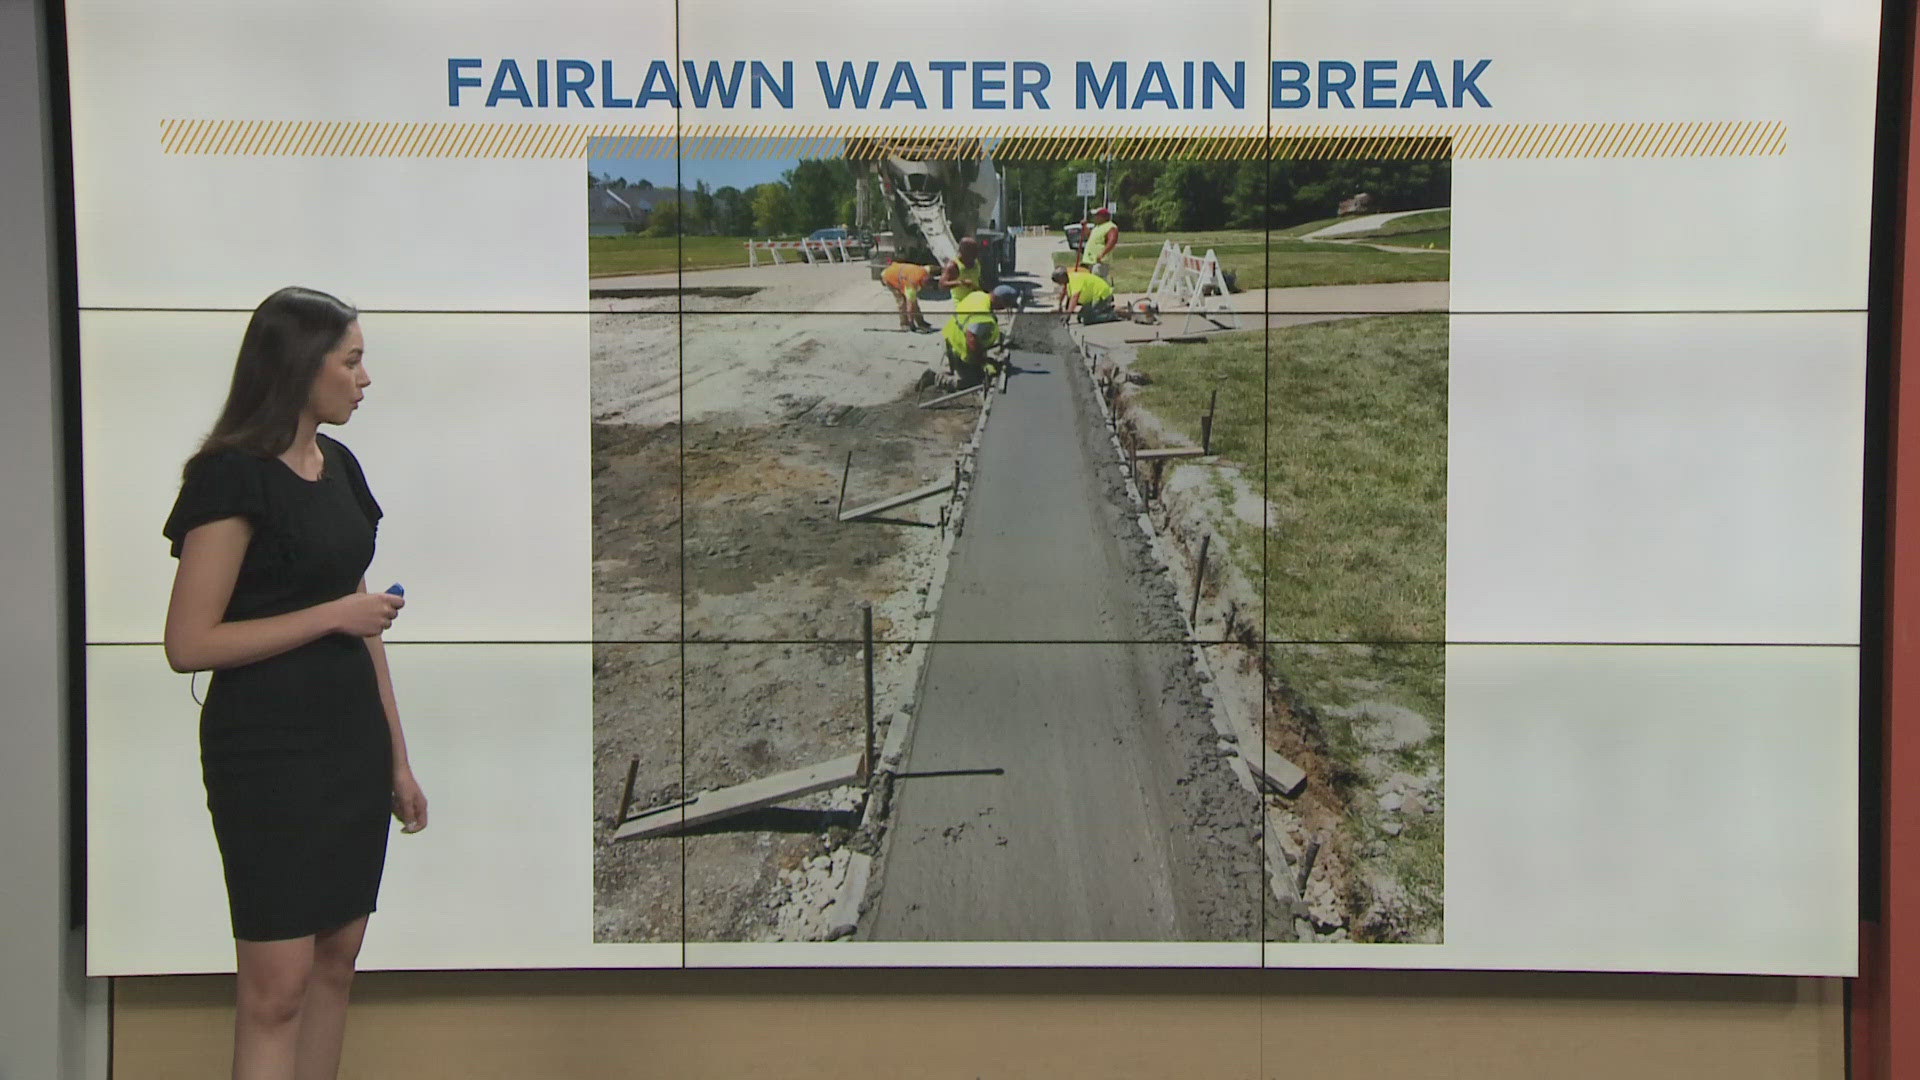 Although the roadway remains closed as of Thursday morning, the city of Fairlawn shared another update on Facebook on Wednesday.